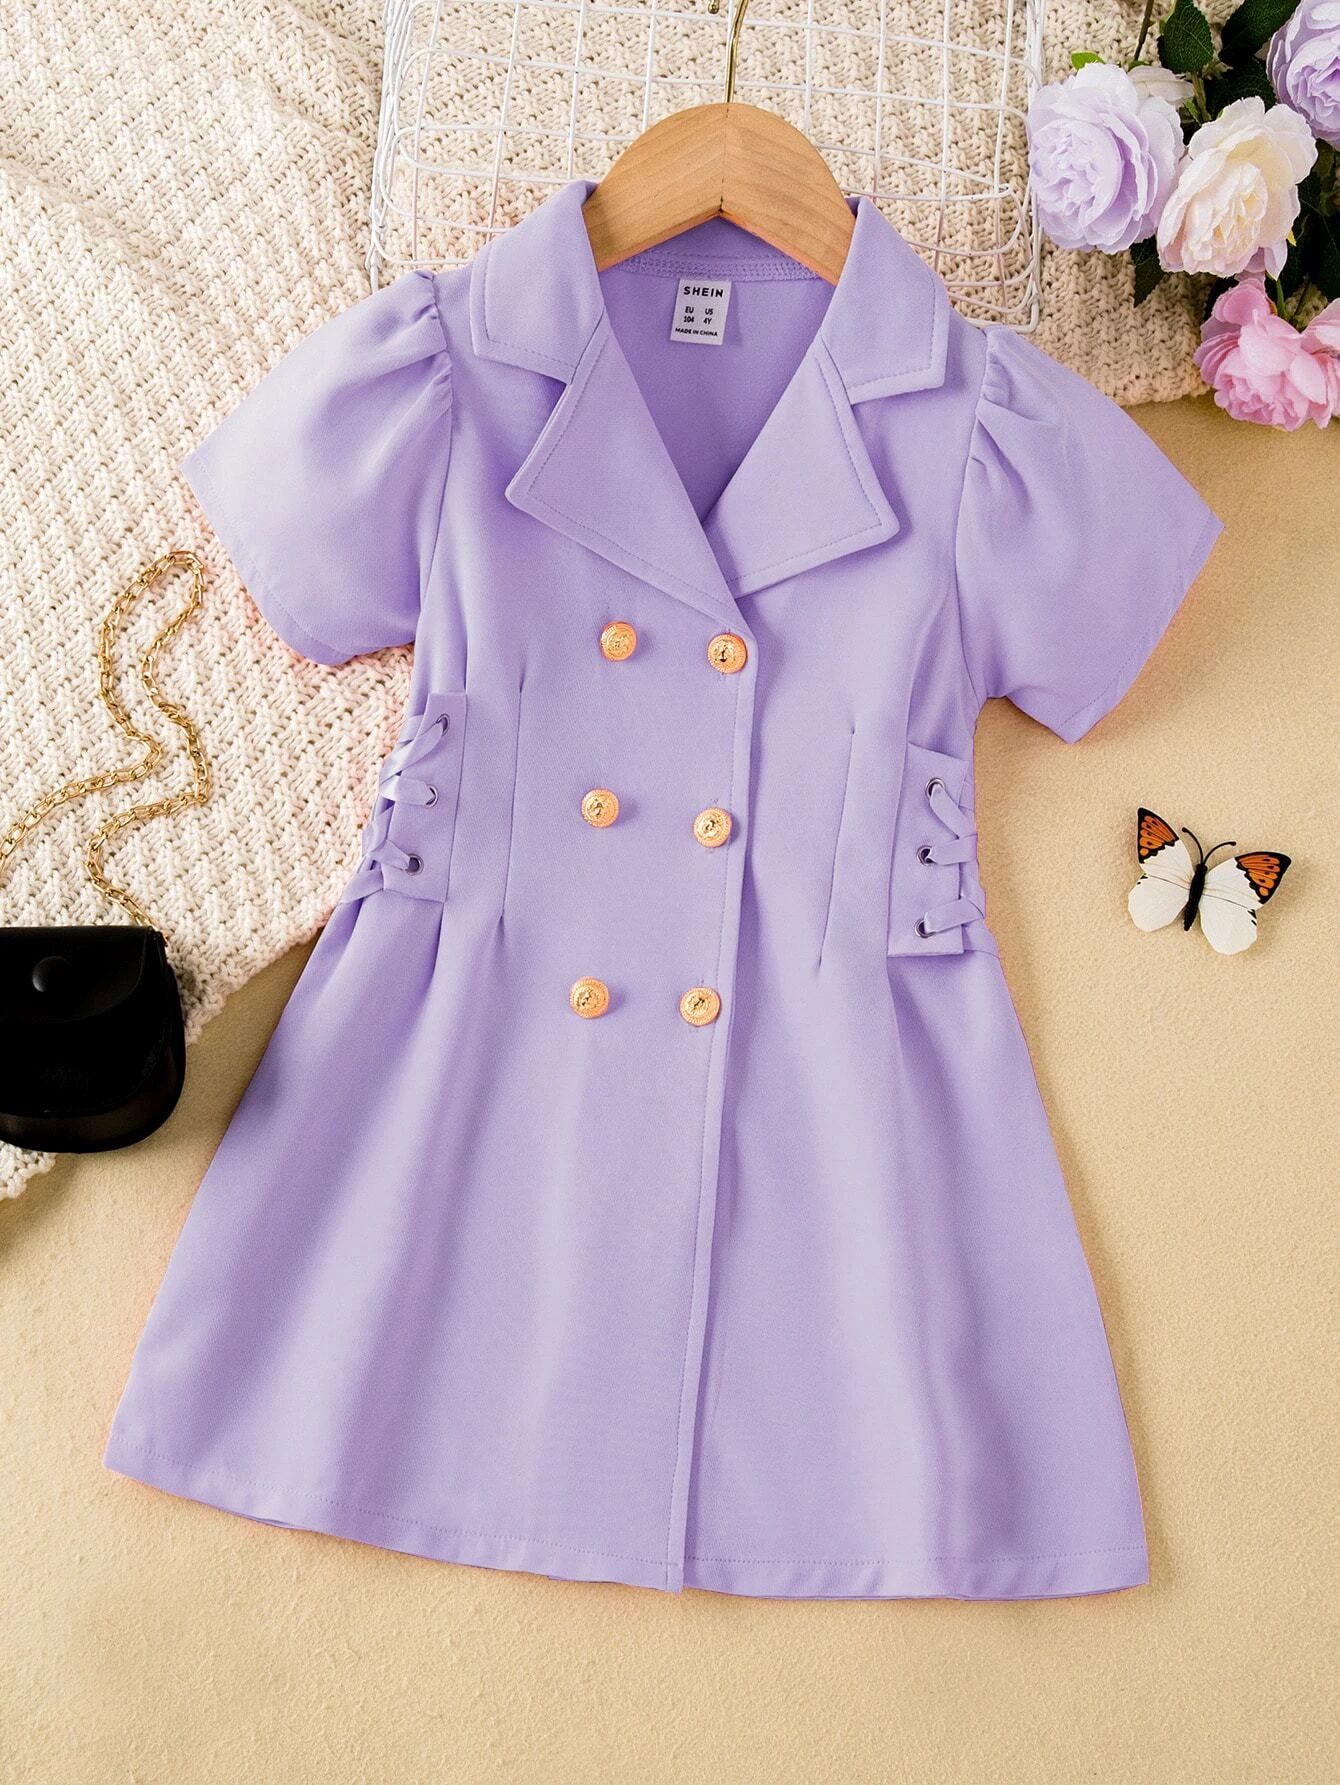 Toddler Girls Double Breasted Puff Sleeve Lace Up Side Shirt Dress SKU: sk2207265969651690(100+ R... | SHEIN